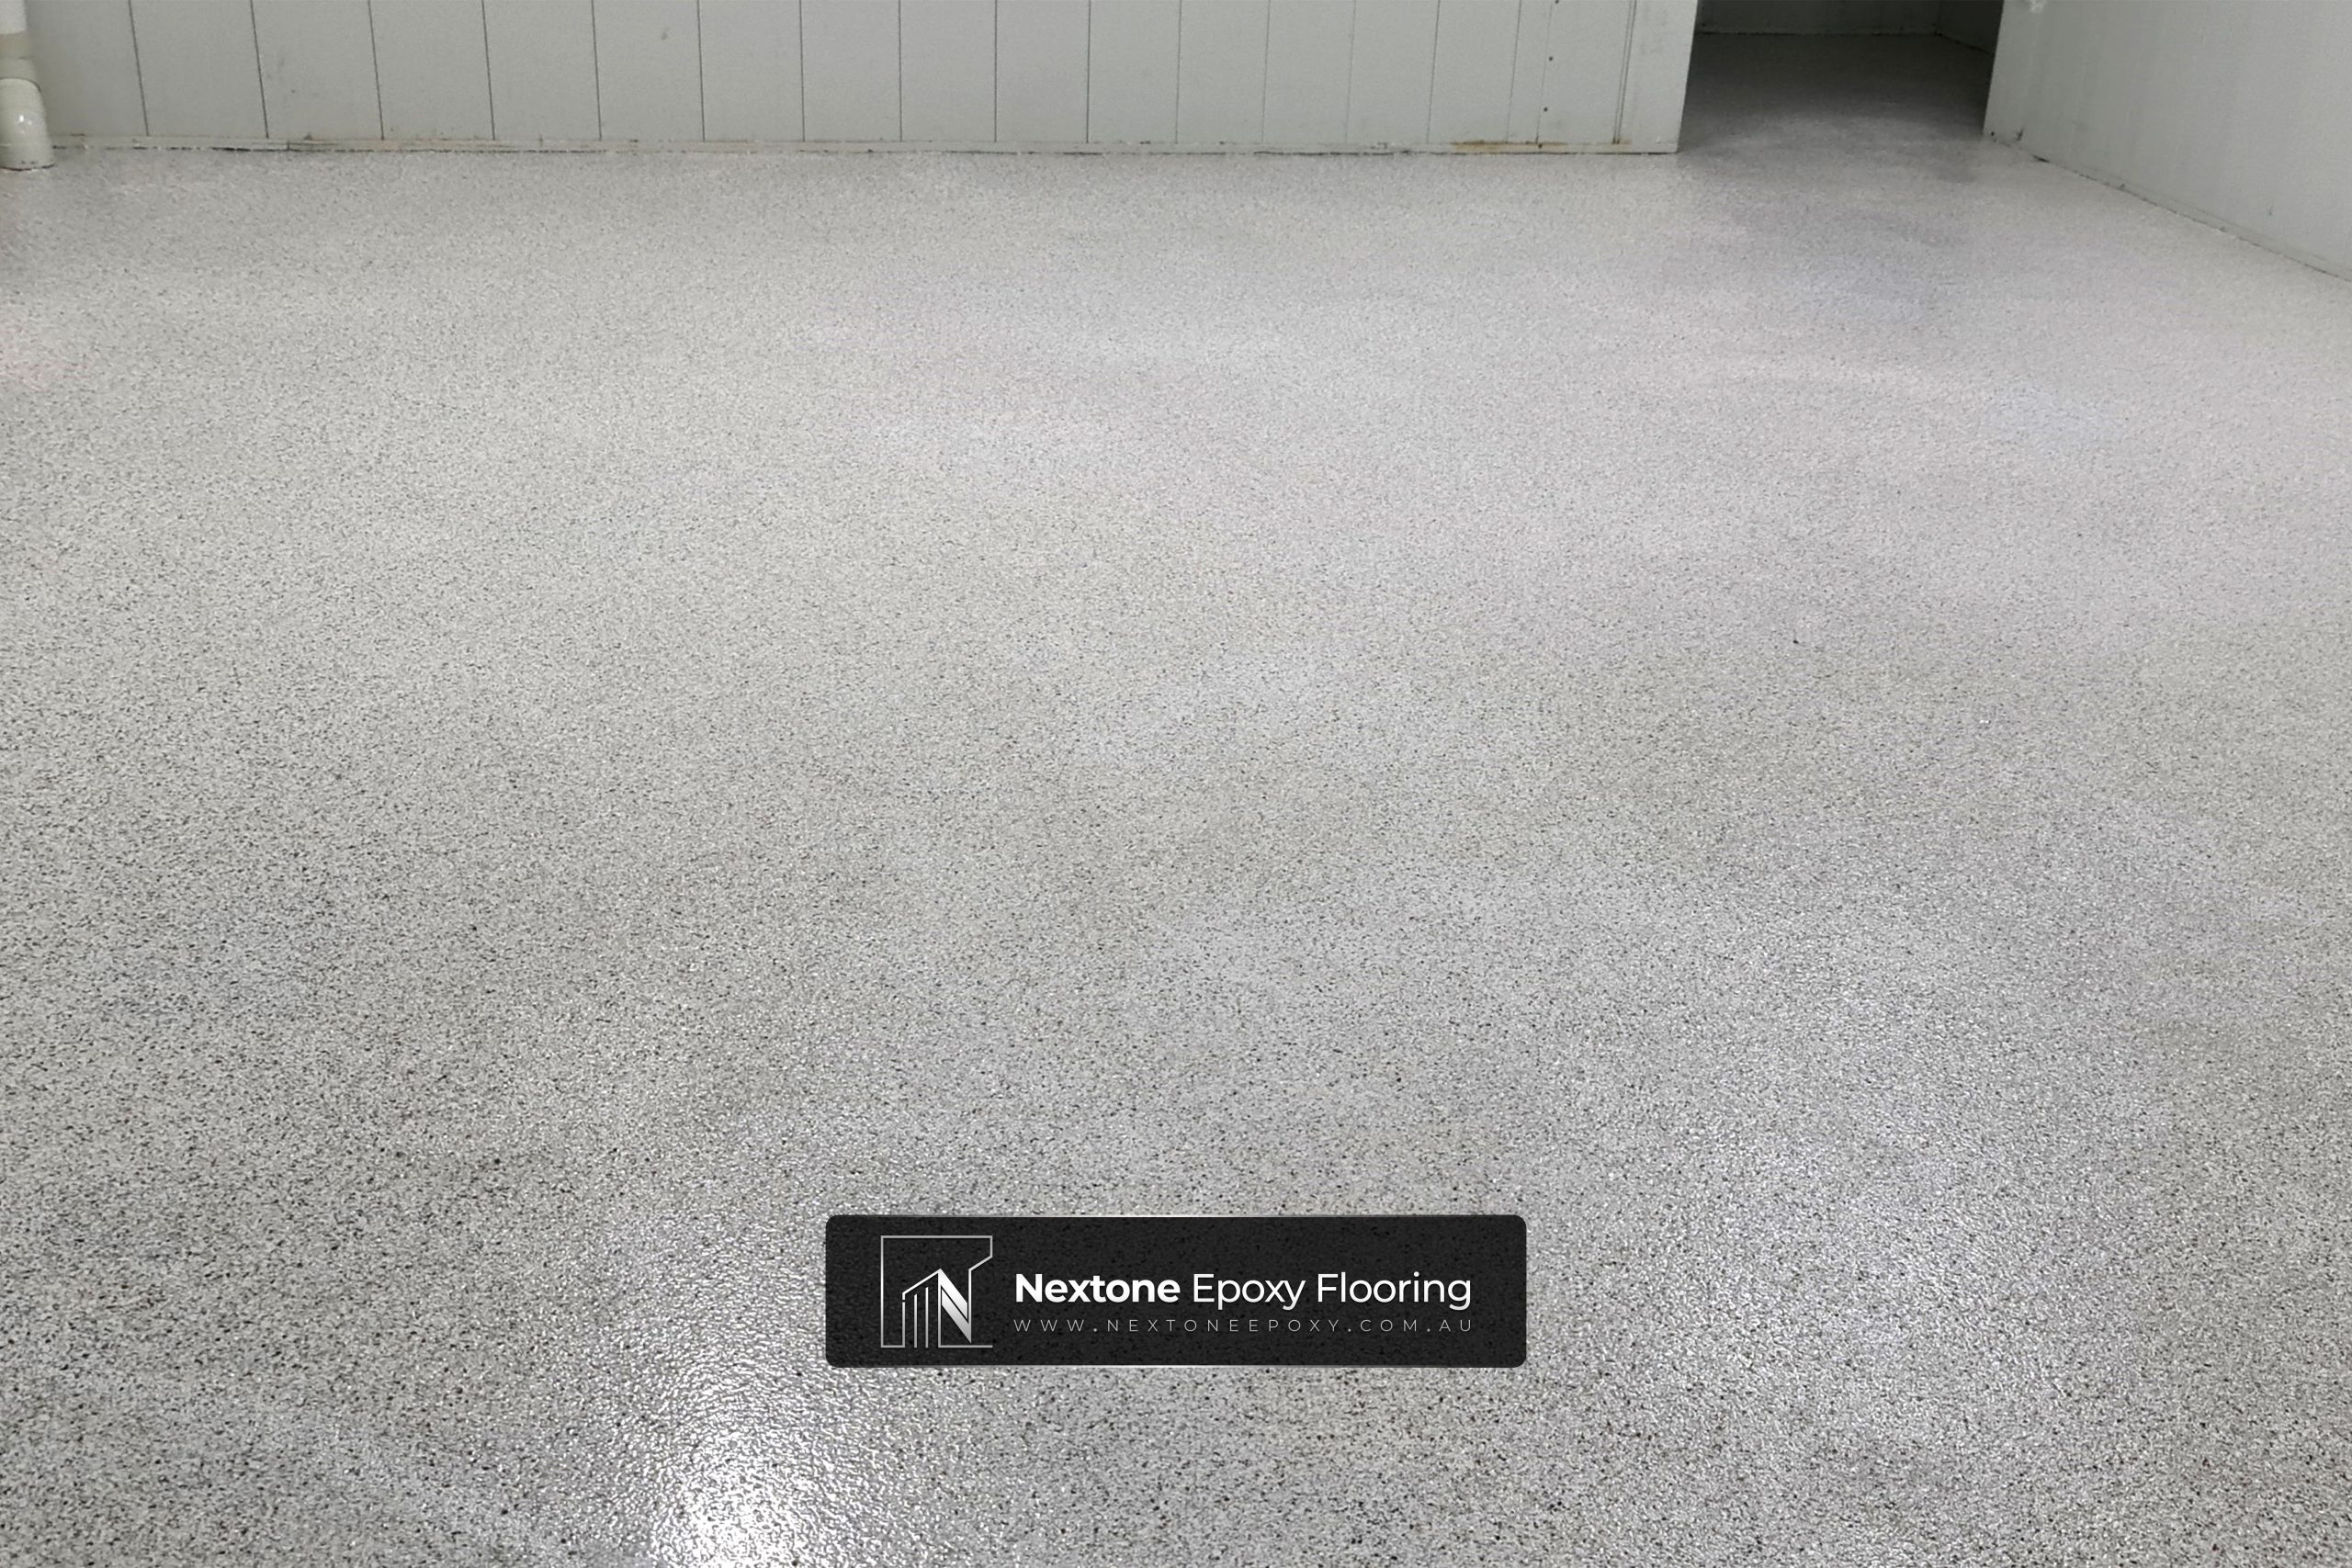 Epoxy flake floor for home/residential garage - black and white